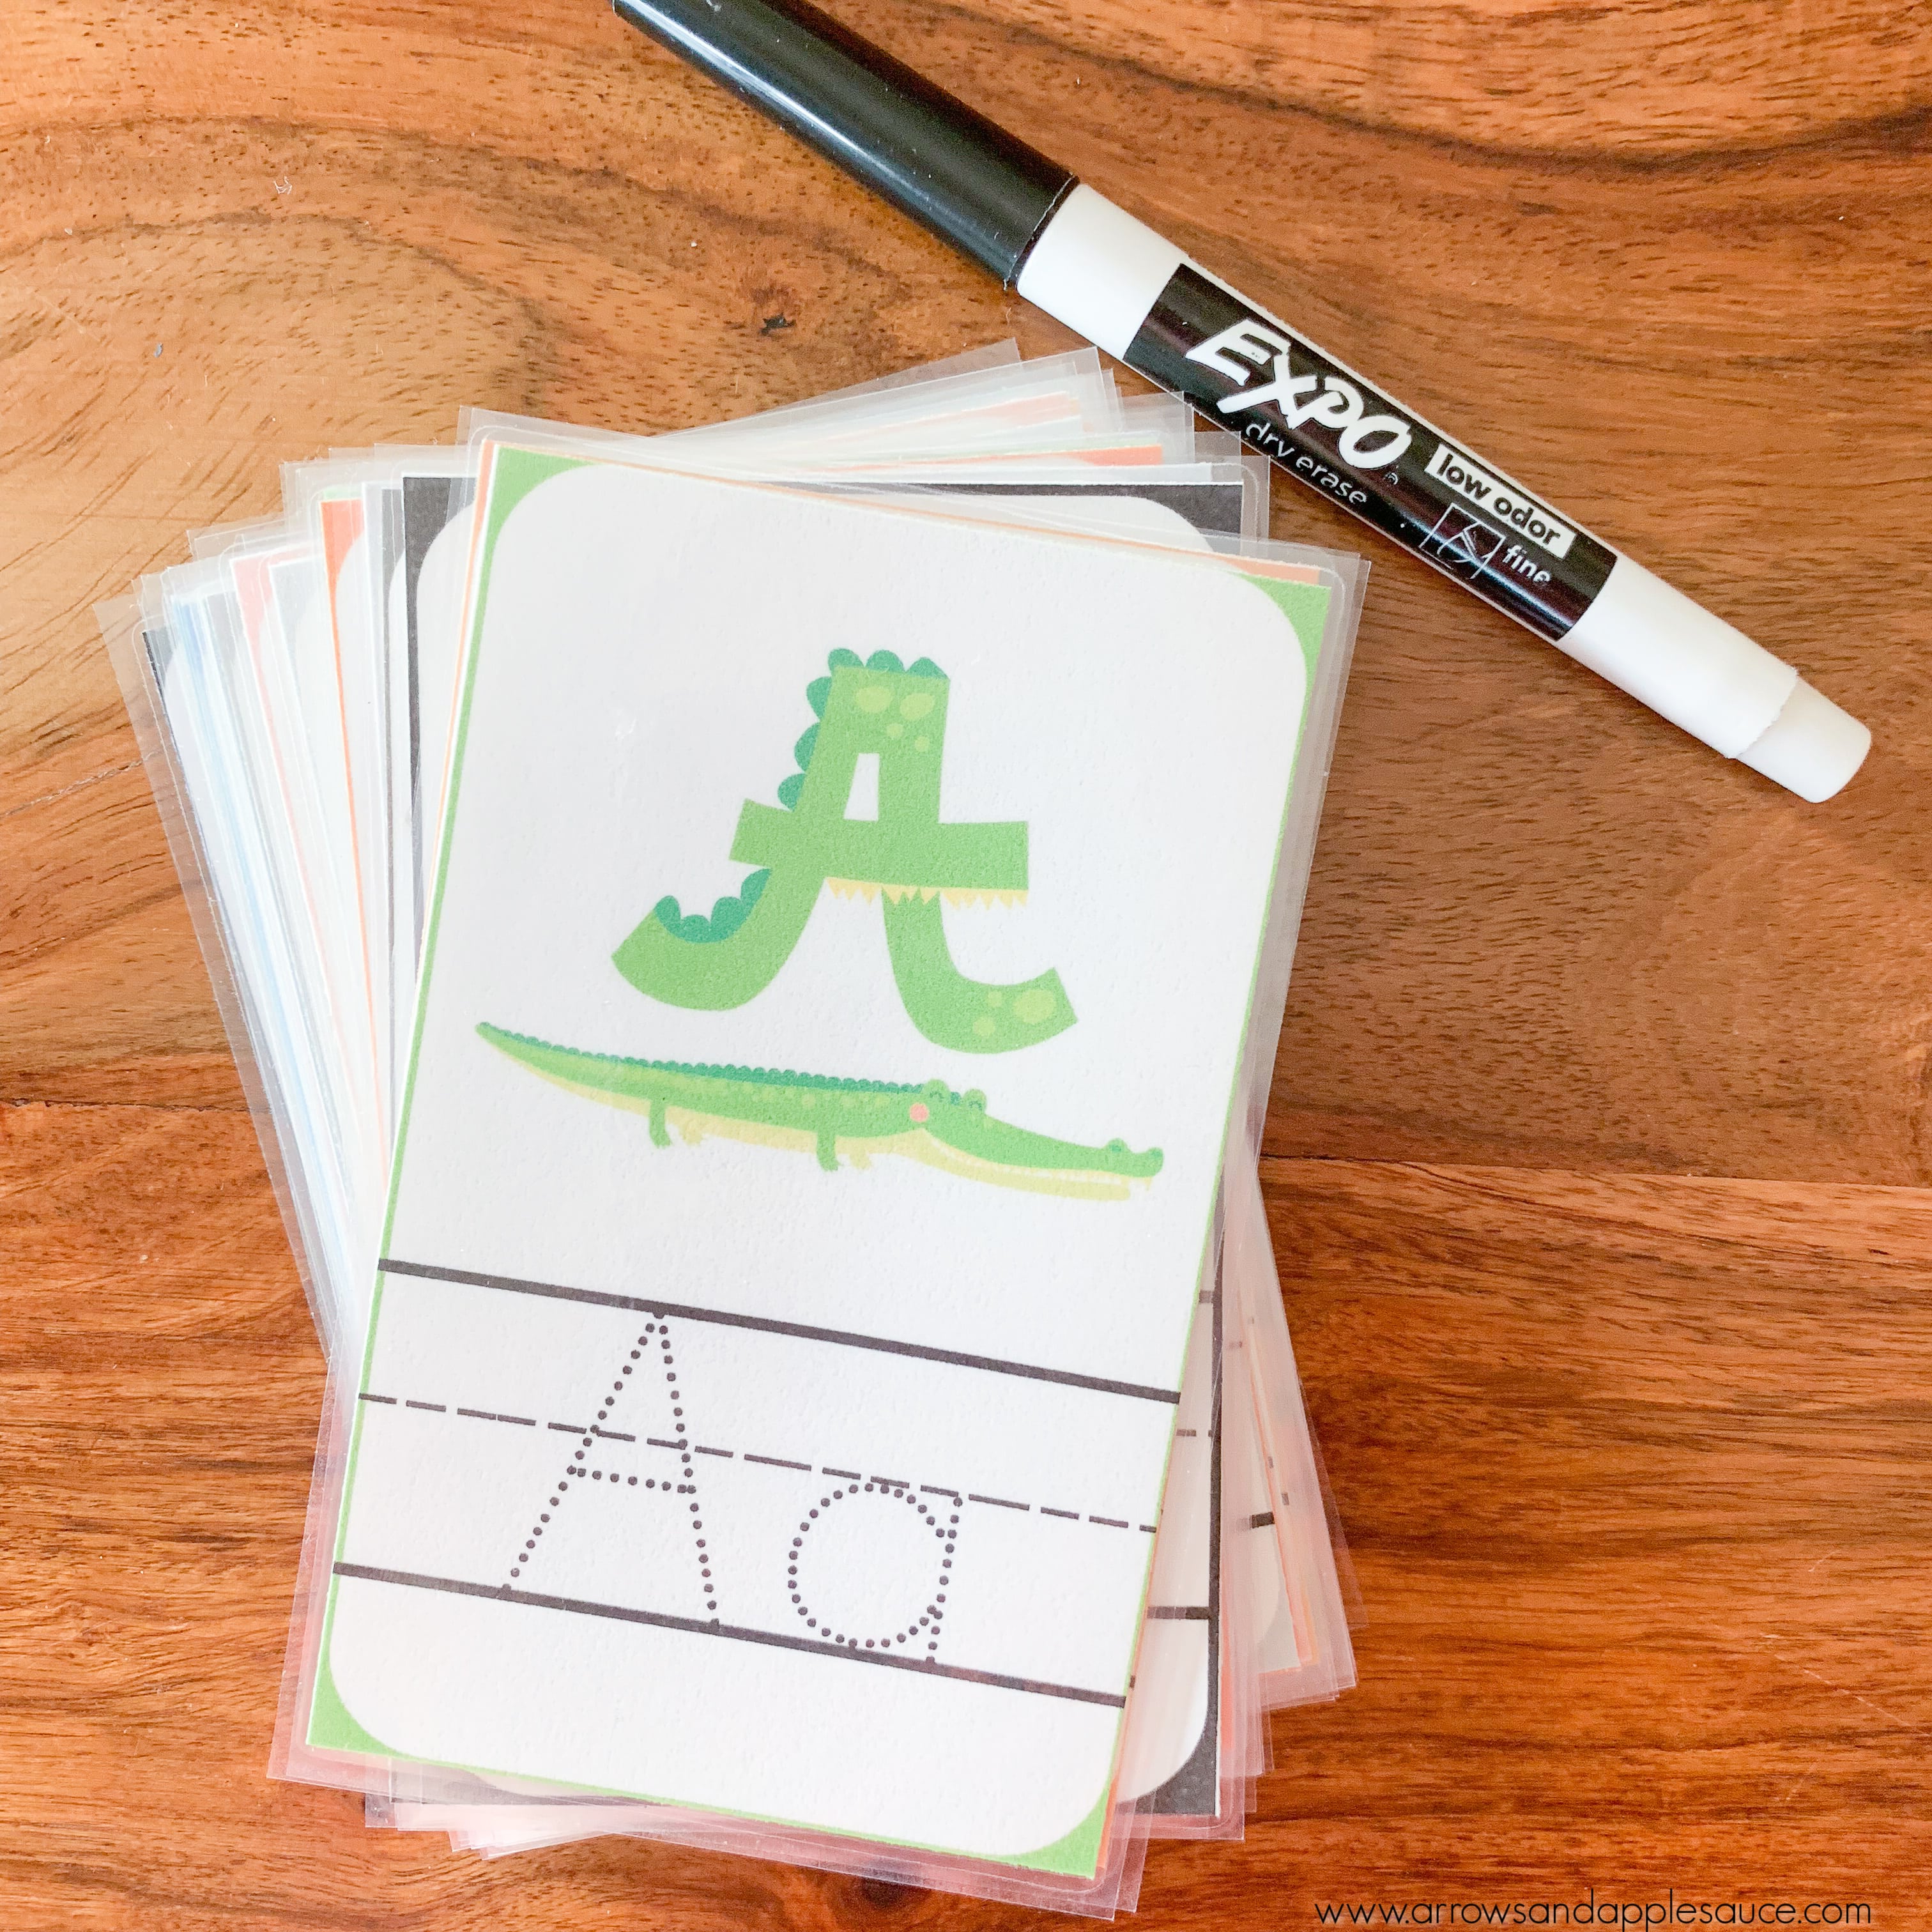 Learning good penmanship can be stressful and maybe even a little tediouse. Check out these awesome tools we use to keep penmanship practice fun and easy! #penmanshippractice #learningtowrite #writingpractice #alphabetpractice #learningtospell #writingtools #preschoolwriting #preschoolathome #homeschoolactivities #learningathome